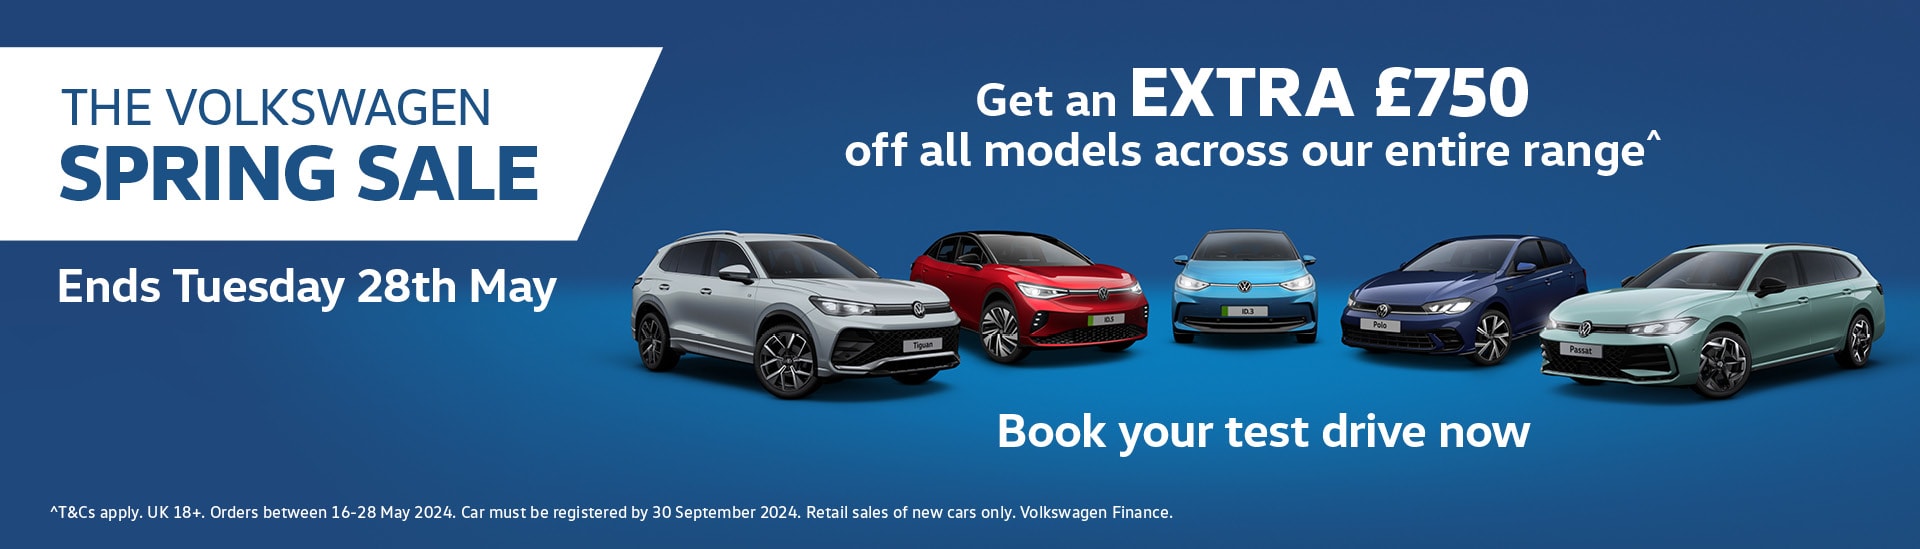 The Volkswagen Spring Sale | 16th - 28th May